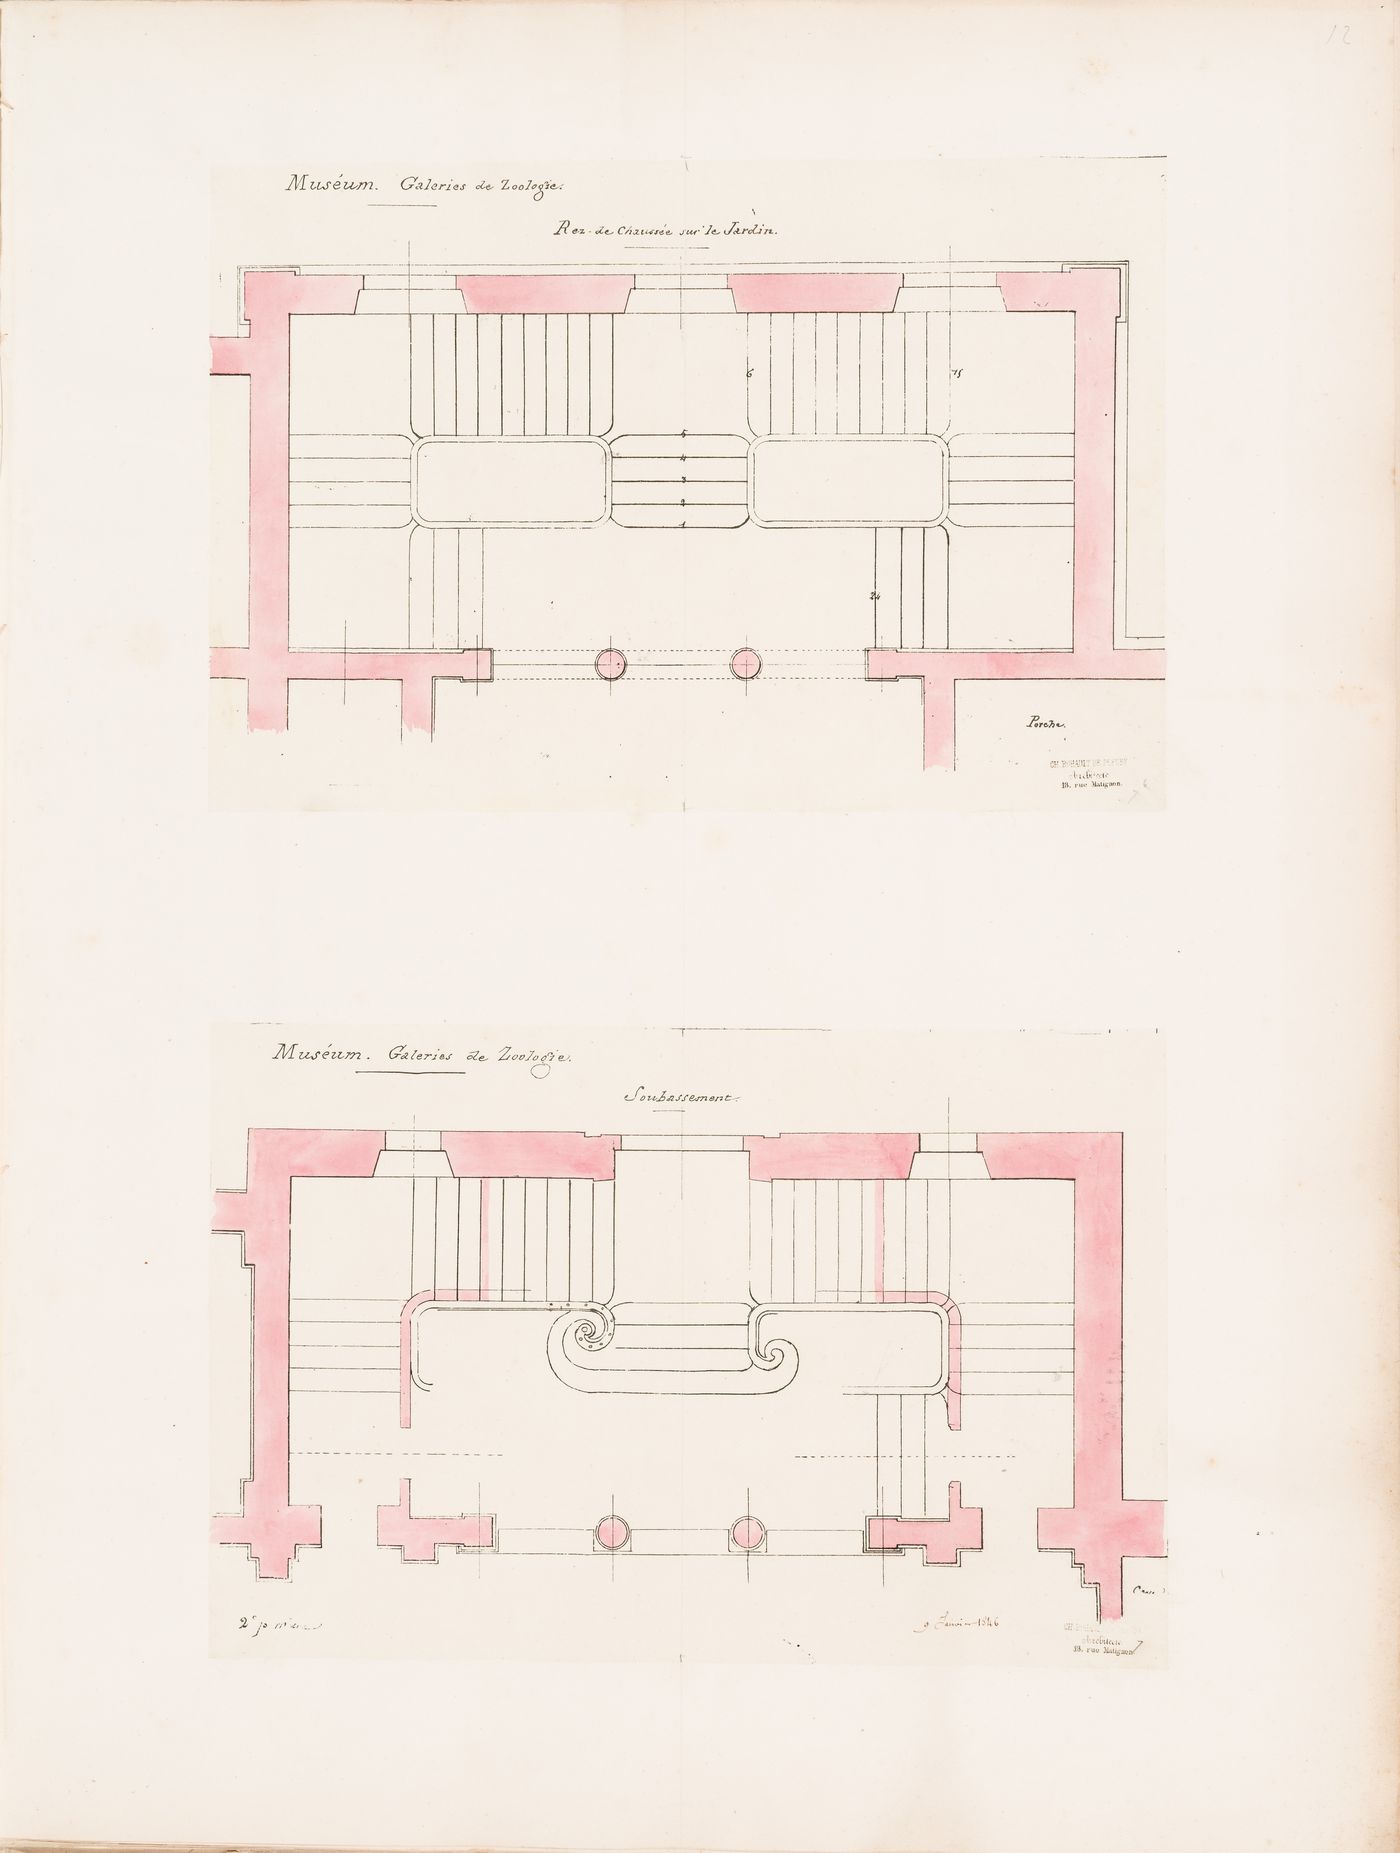 Project for a Galerie de zoologie, 1846: Plans for the principal "soubassement" and the ground floor stairs